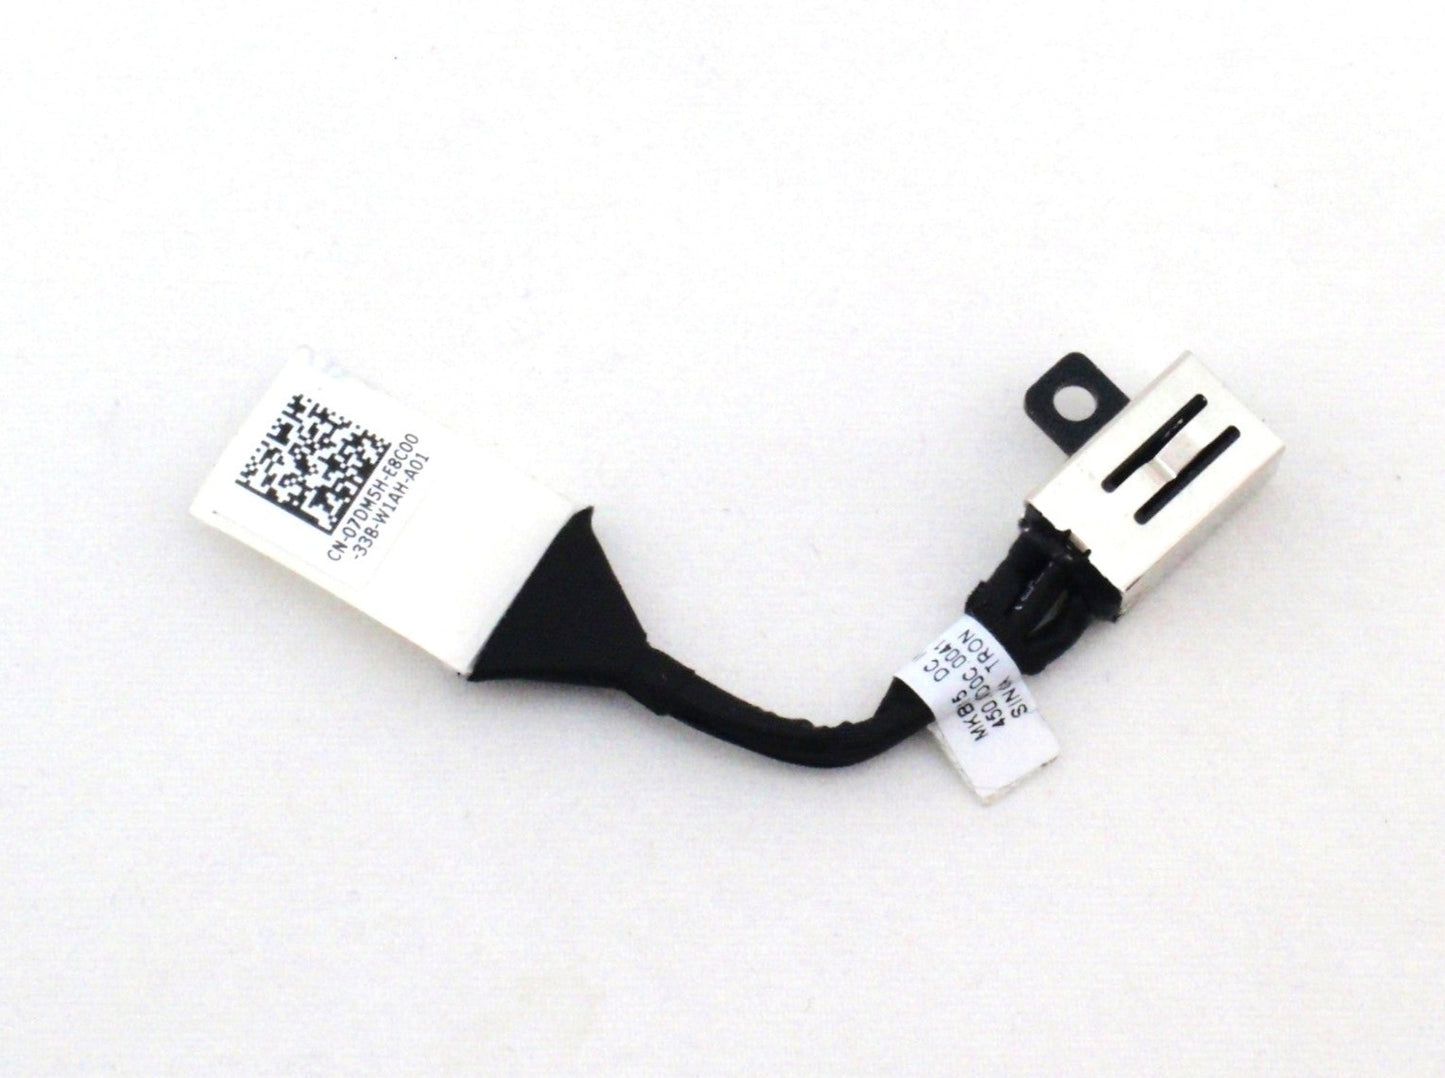 Dell New DC In Power Jack Charging Port Connector Cable 07DM5H Latitude 3410 3510 450.0KD0C.0001 .0011 .0041 7DM5H